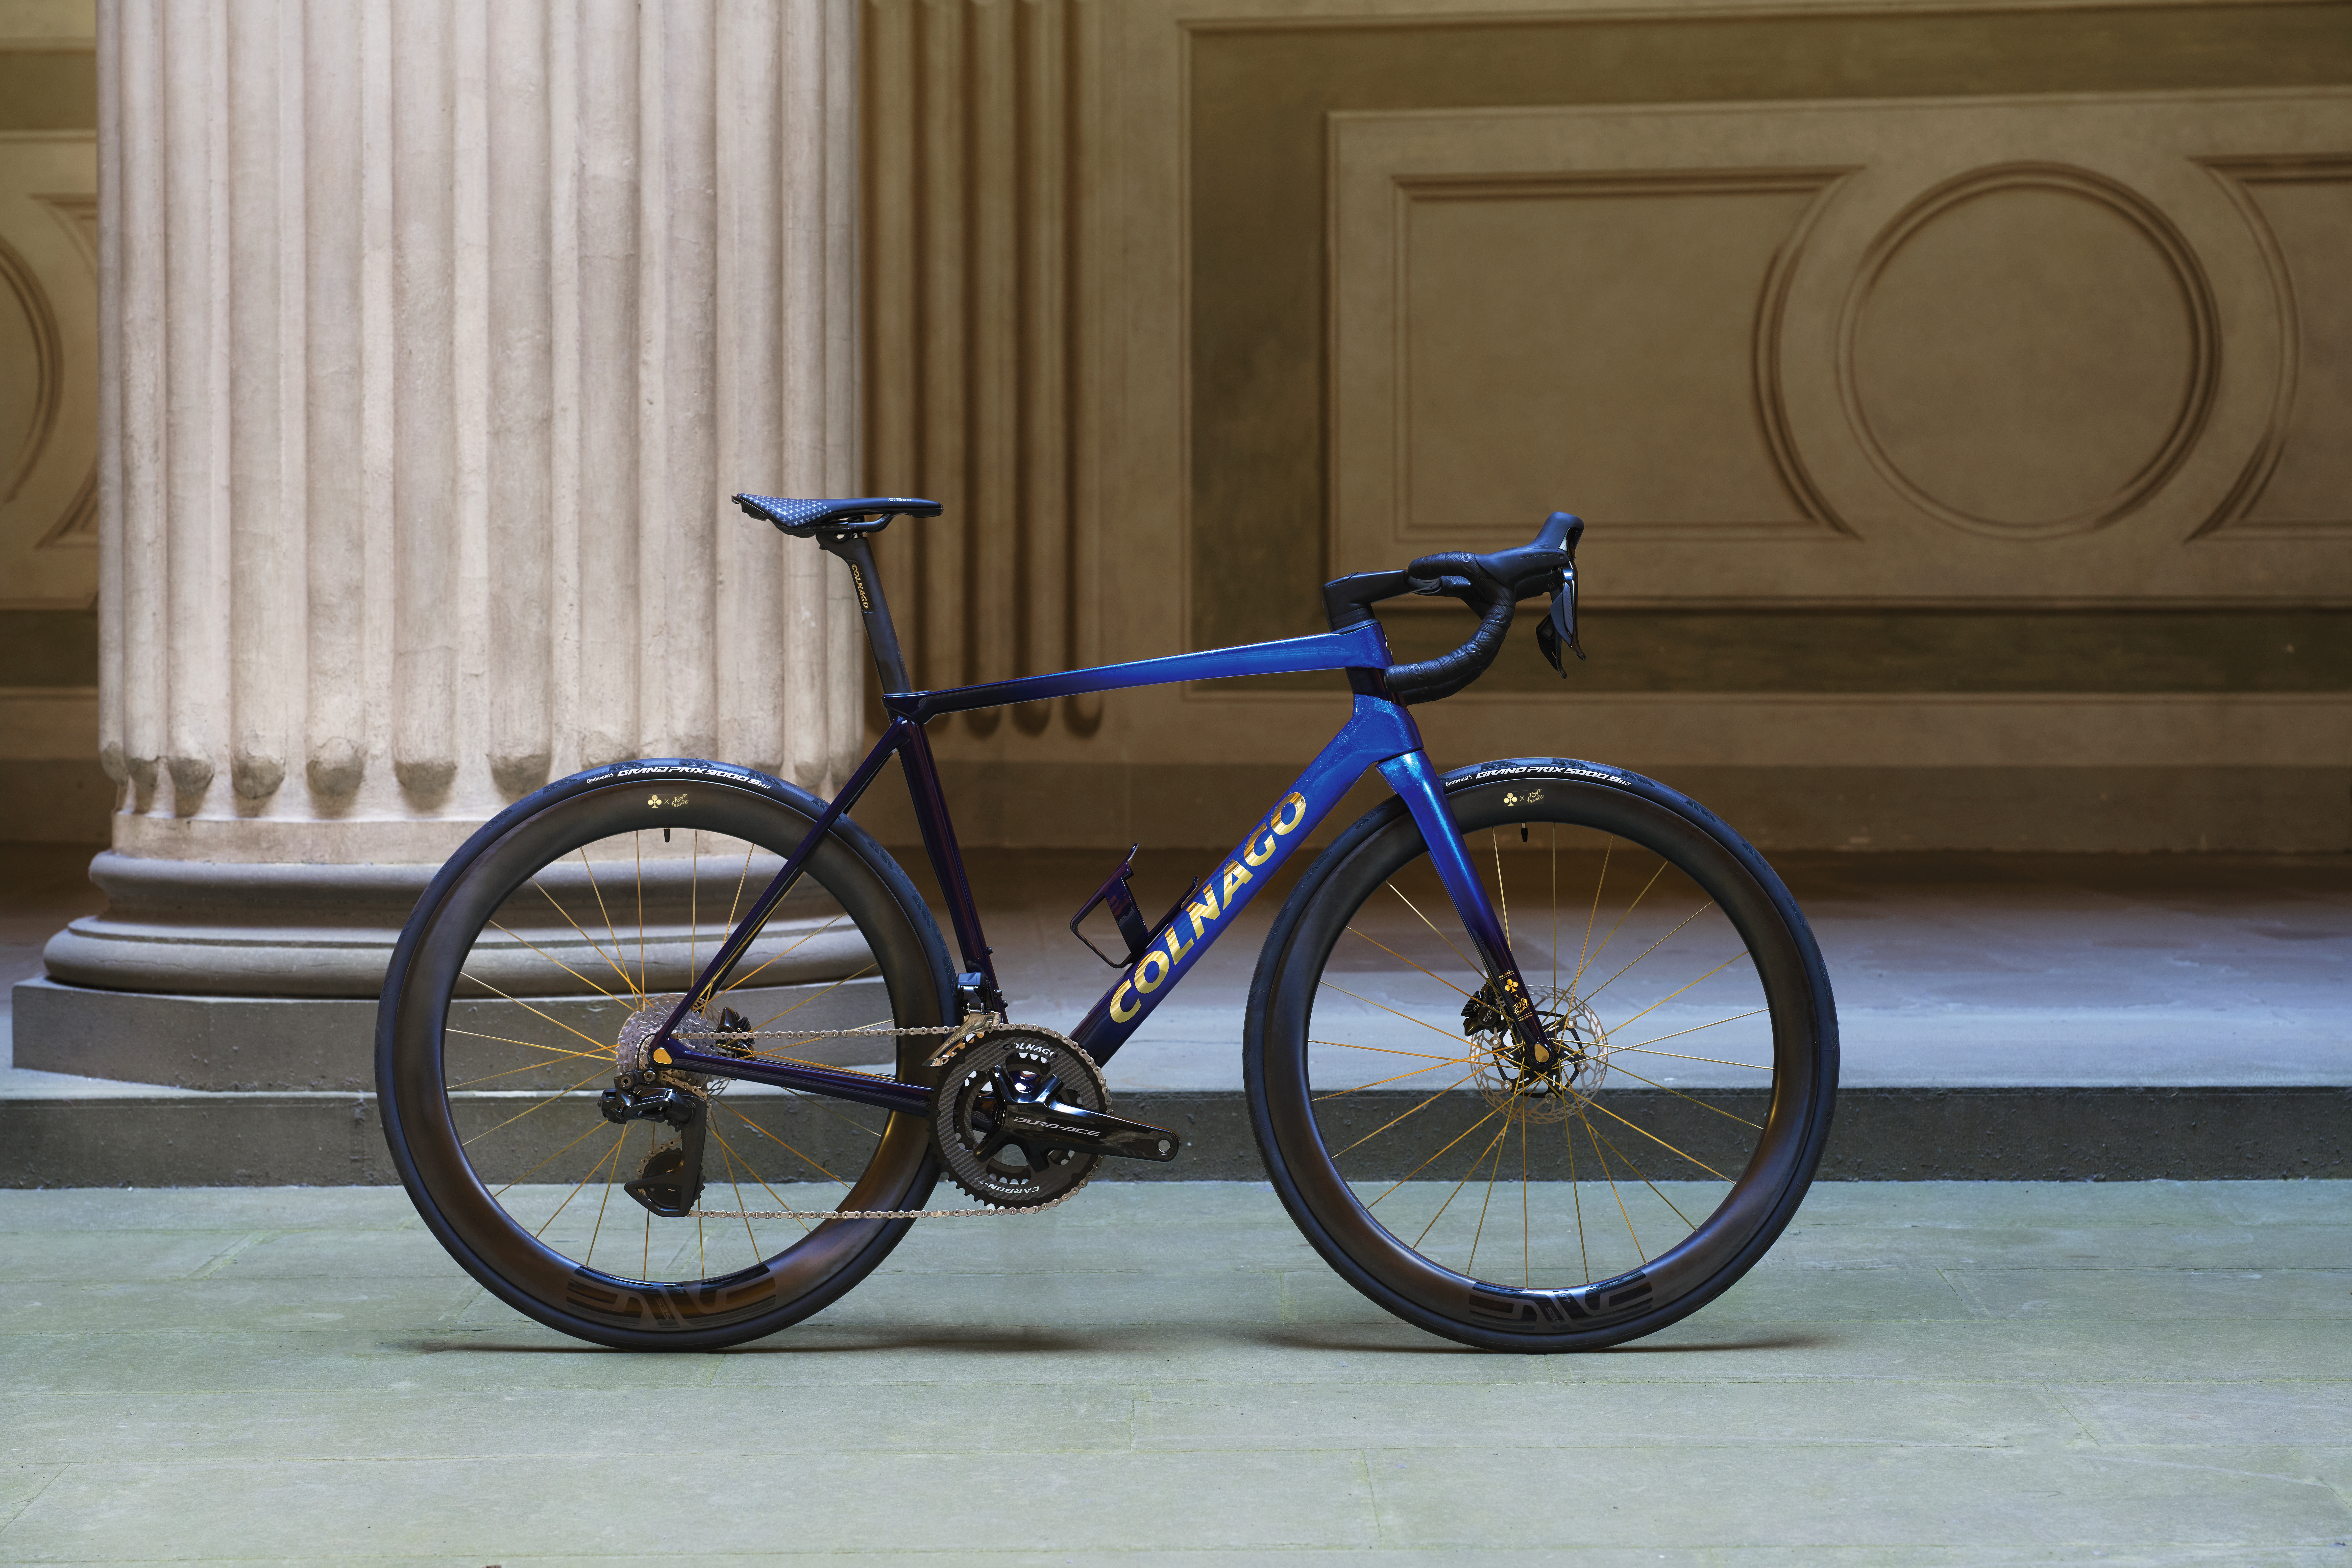 Expected to Top 6 Figures, Tadej Pogačar’s Limited Edition Colnago Sits at $45k